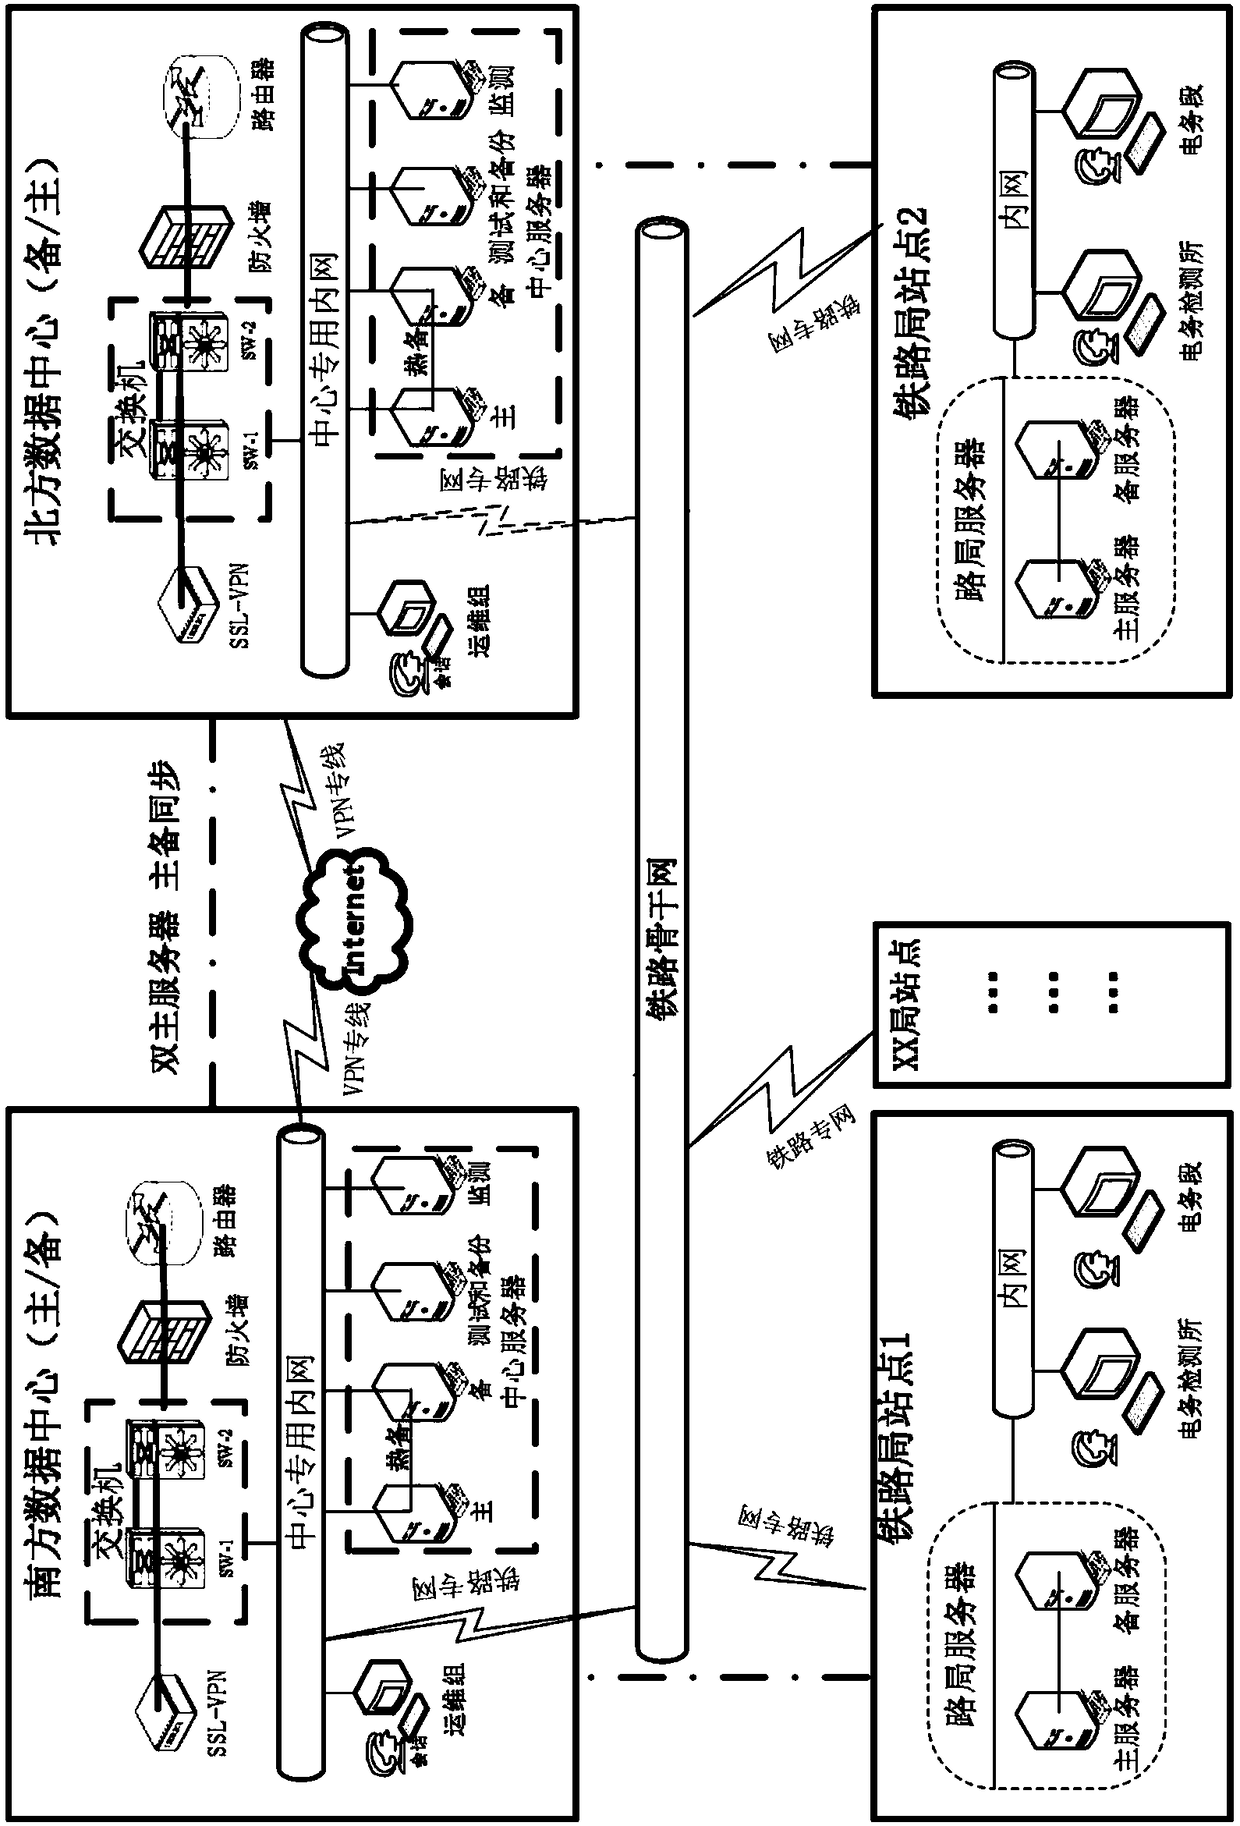 Storage system for remotely backing up data of train operation monitoring device